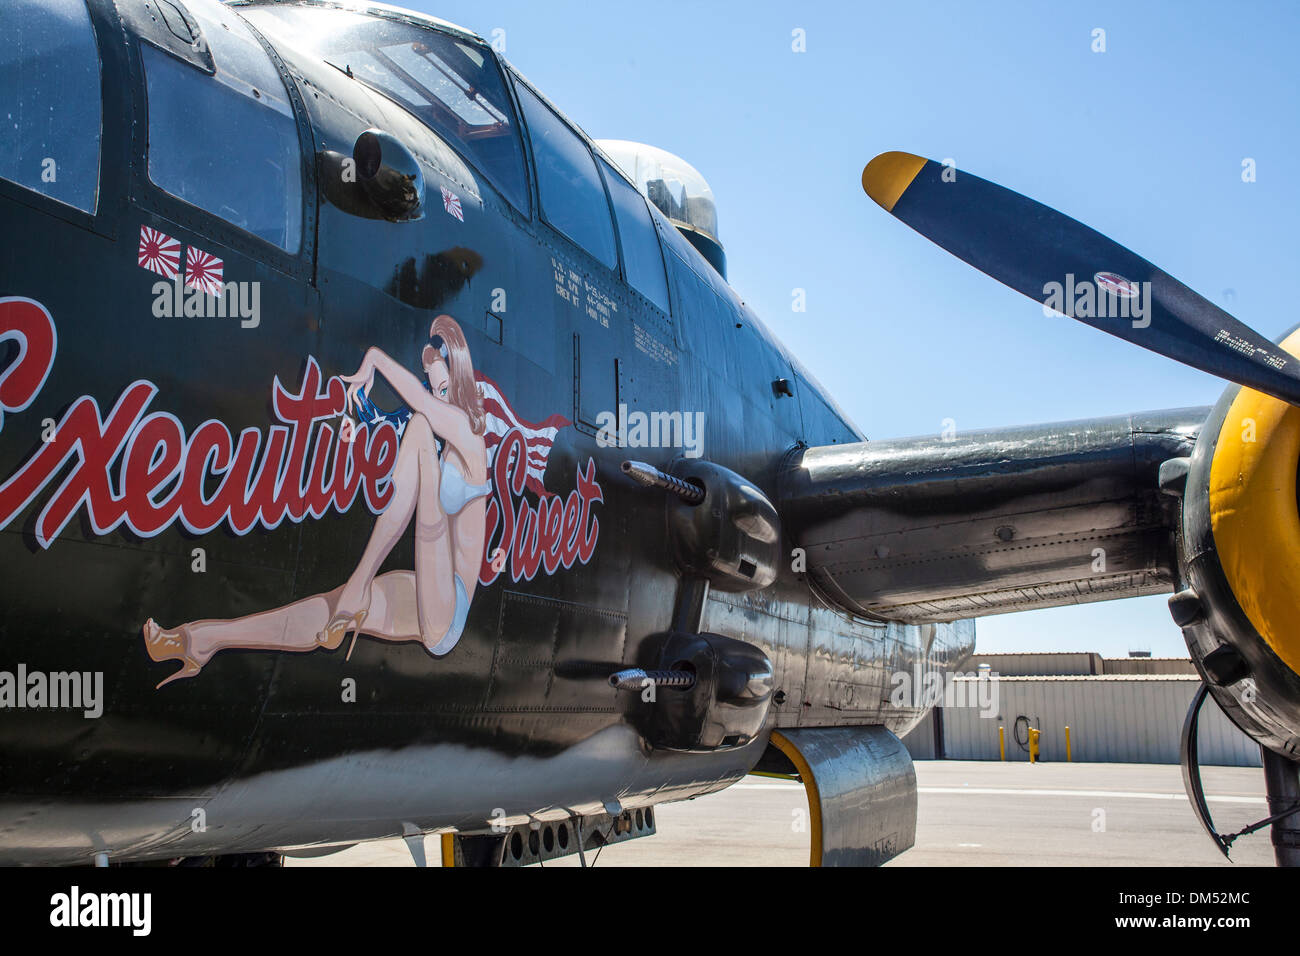 A B-25 Mitchell belonging to the Commemorative Air Force Museum in Camarillo California Stock Photo